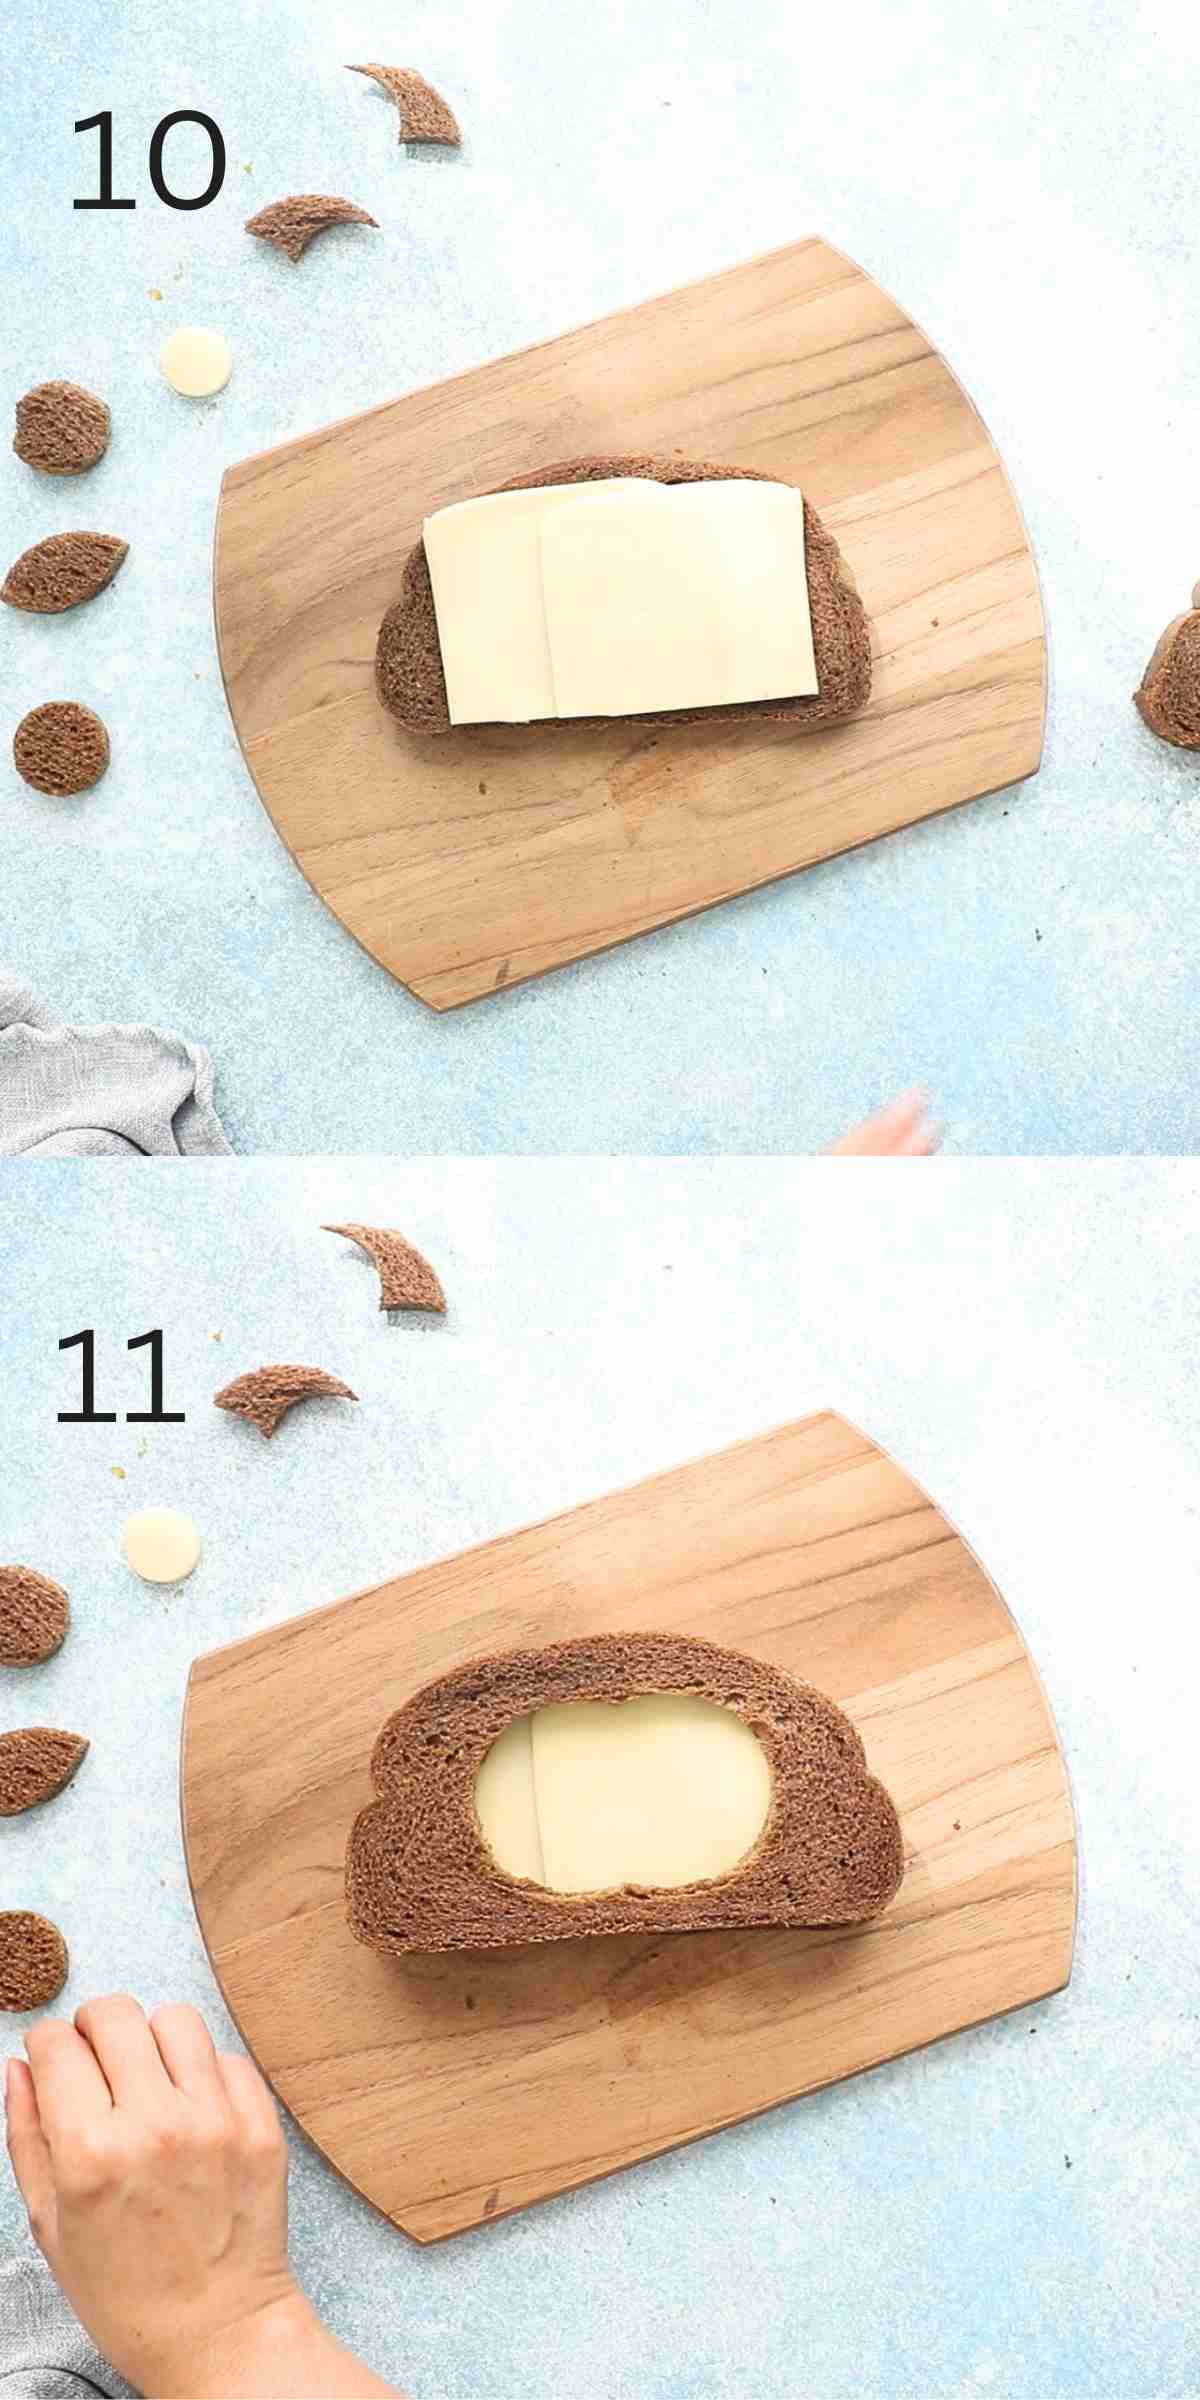 2 photo collage of assembling a grilled cheese sandwich.